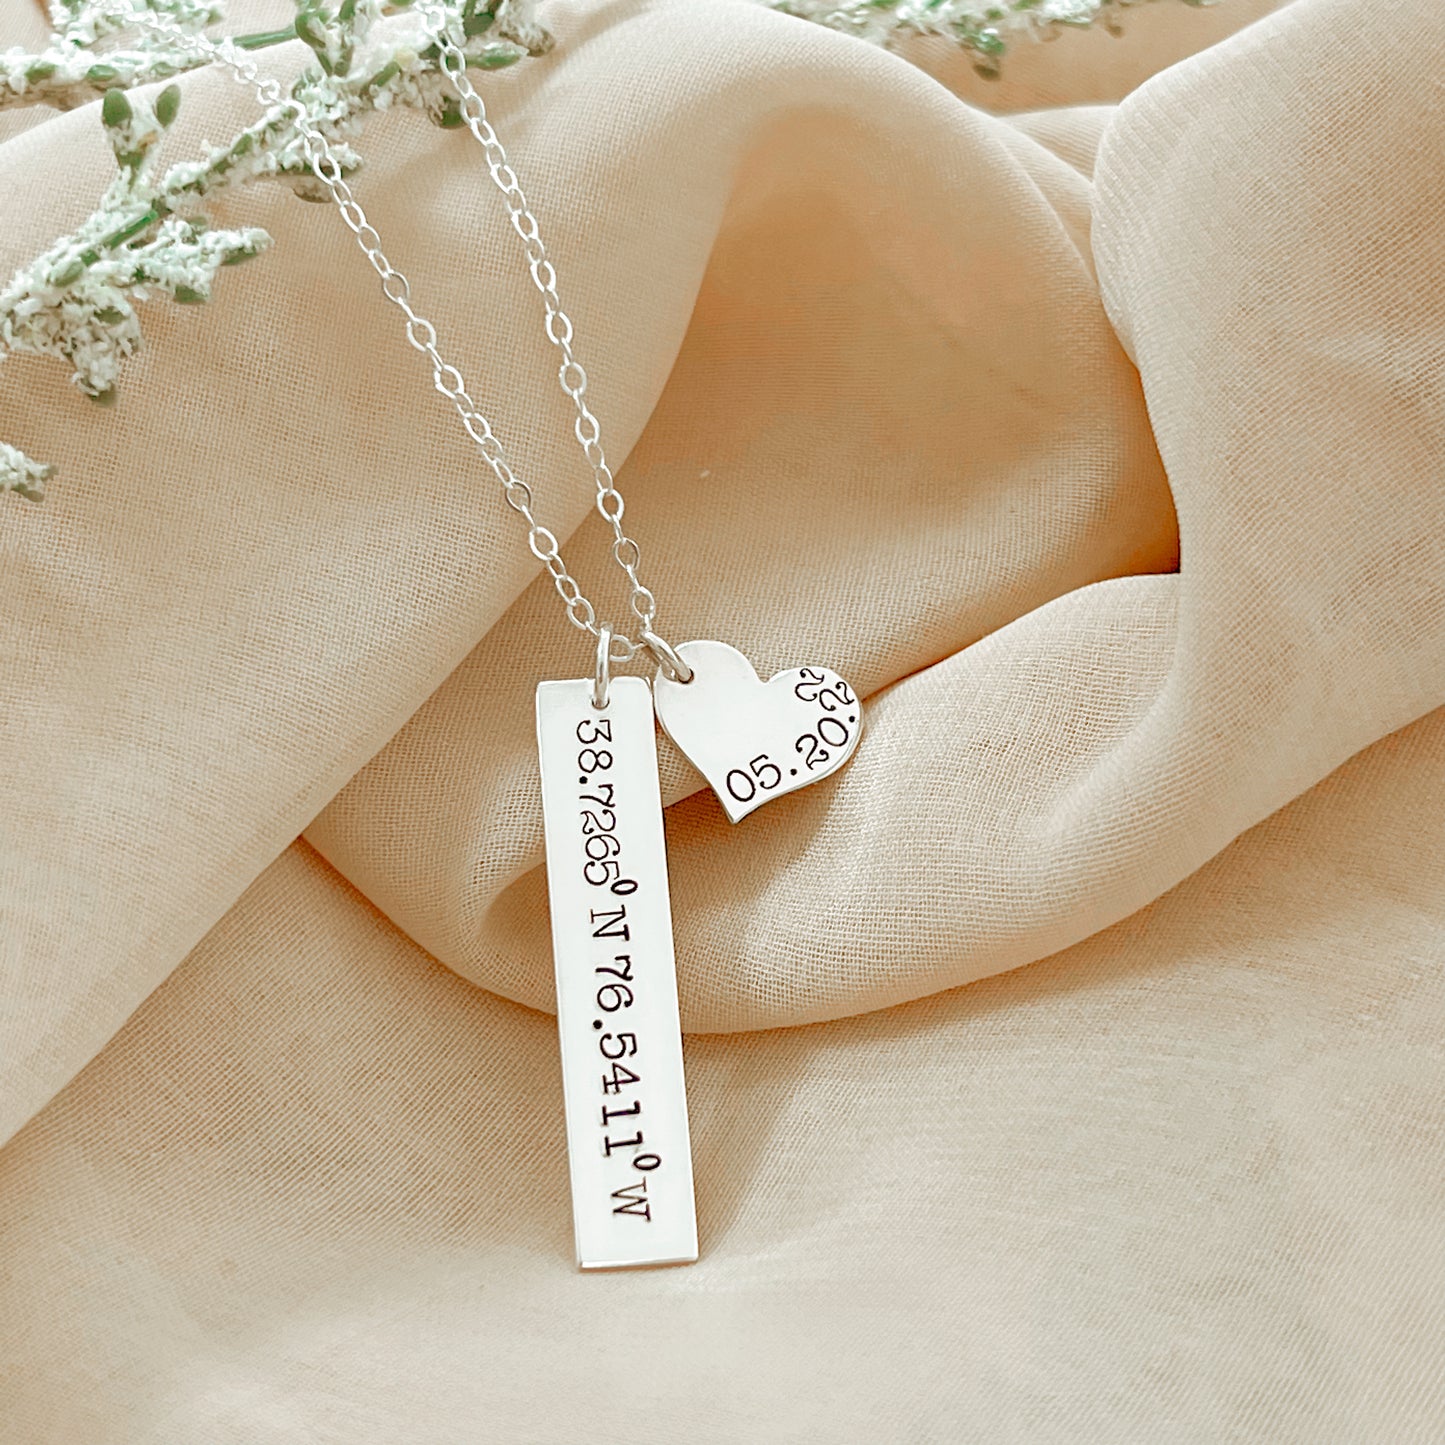 COORDINATES AND DATE NECKLACE